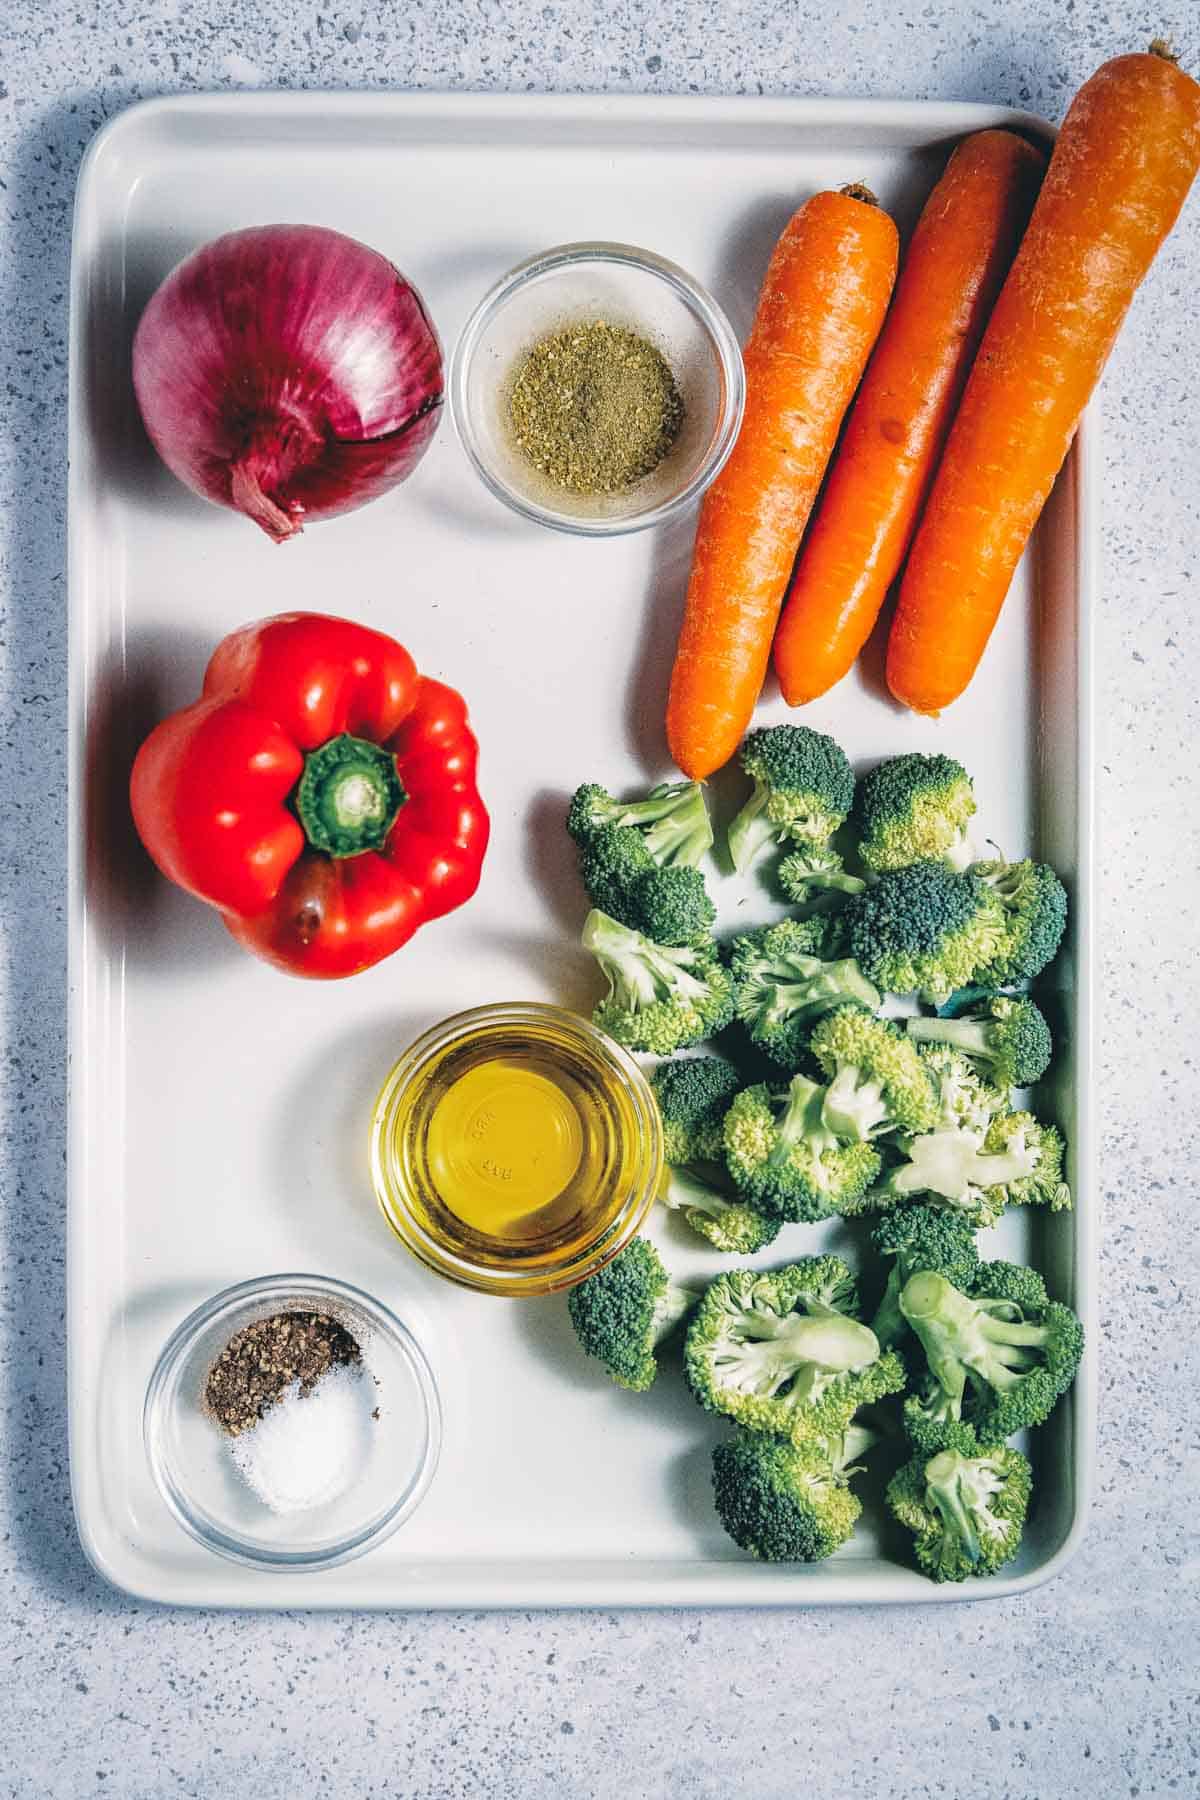 A tray with broccoli, carrots, onions and spices.